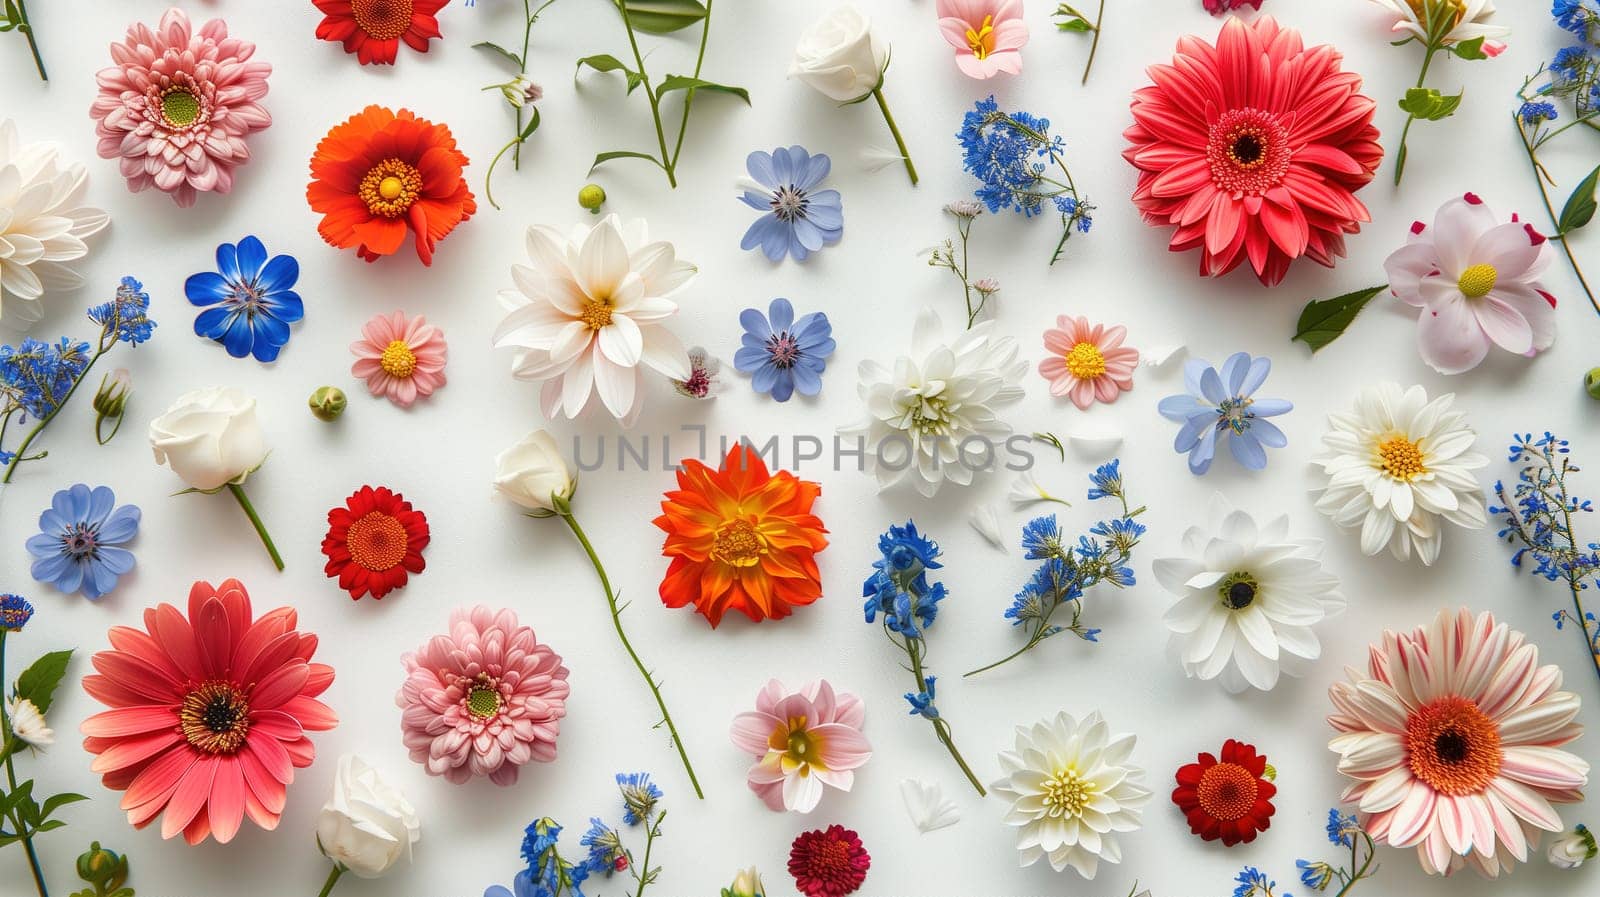 Colorful Flowers Arranged on a White Surface by TRMK